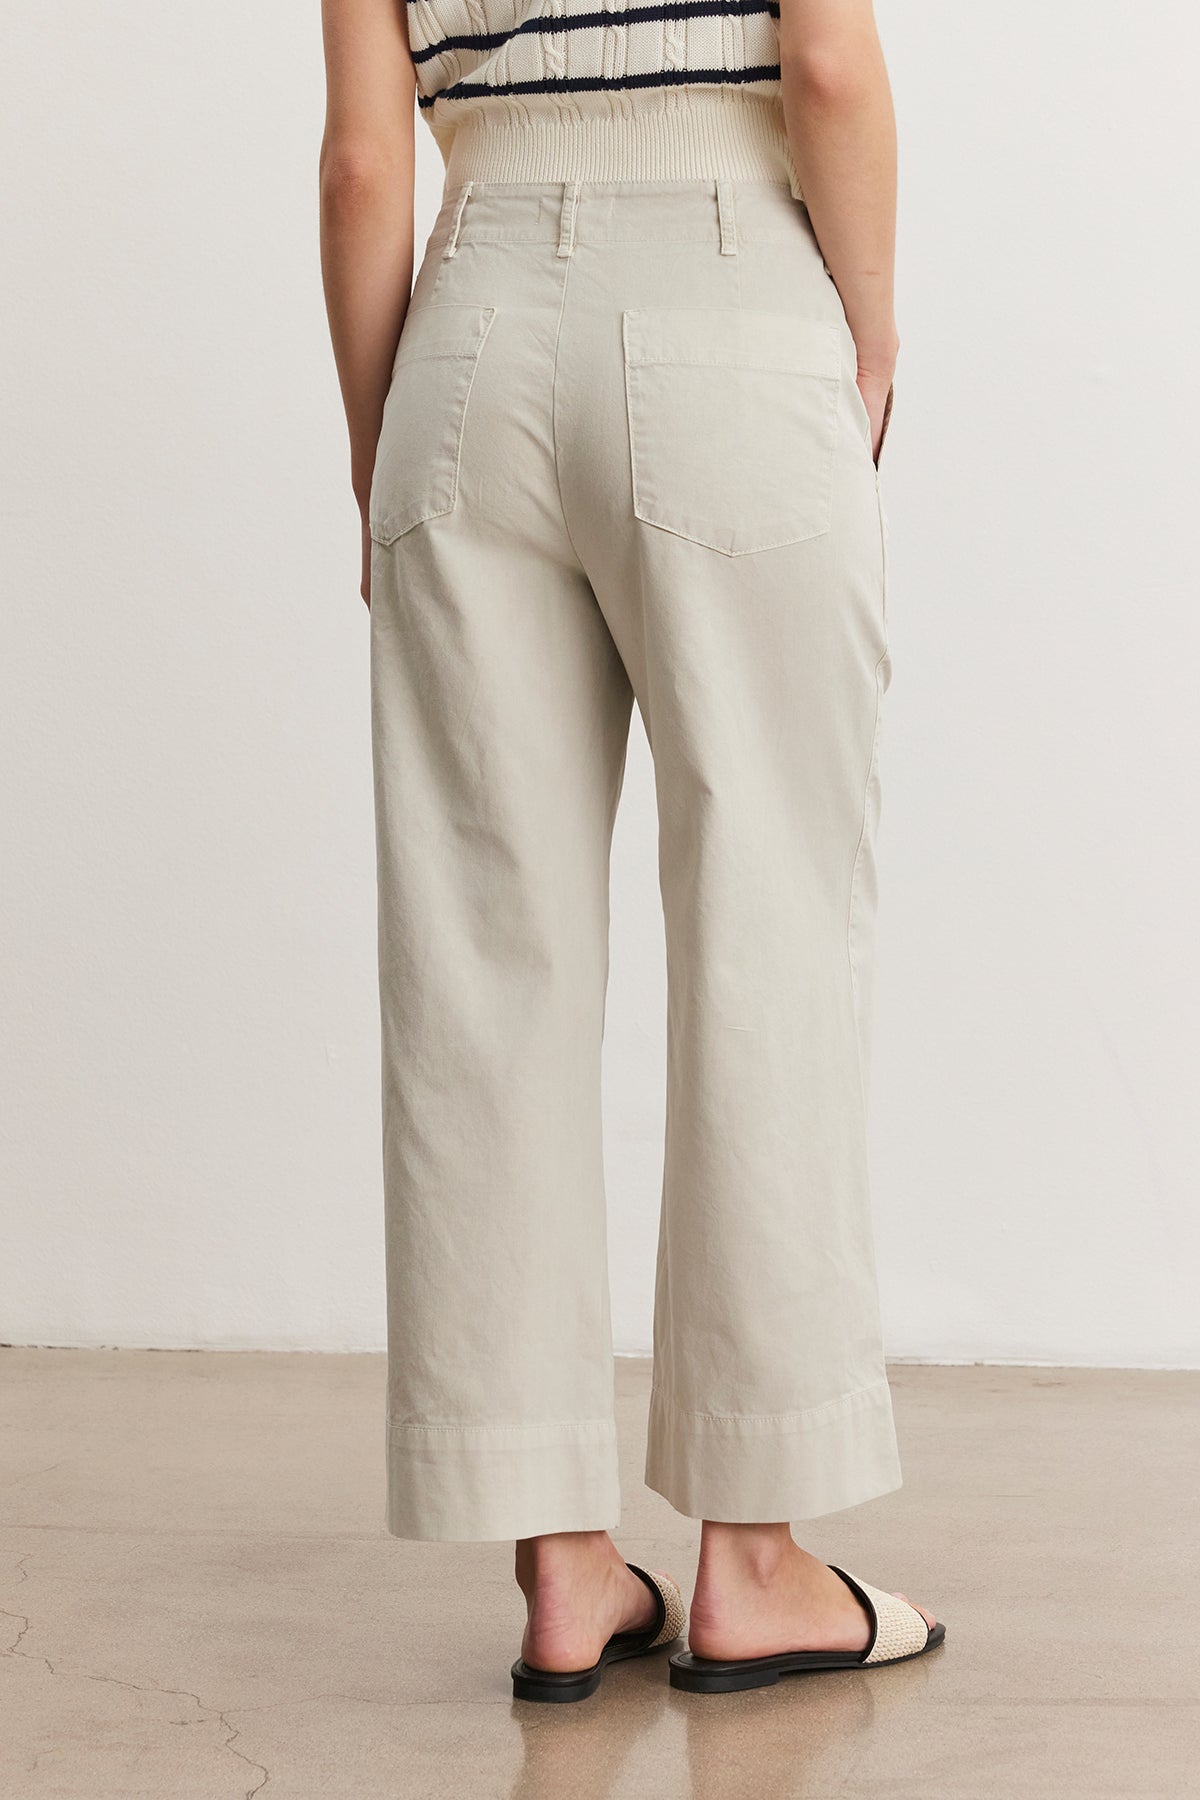 A person wearing beige Velvet by Graham & Spencer MYA COTTON CANVAS PANT with a flared leg and black flat shoes, viewed from behind.-36998760792257